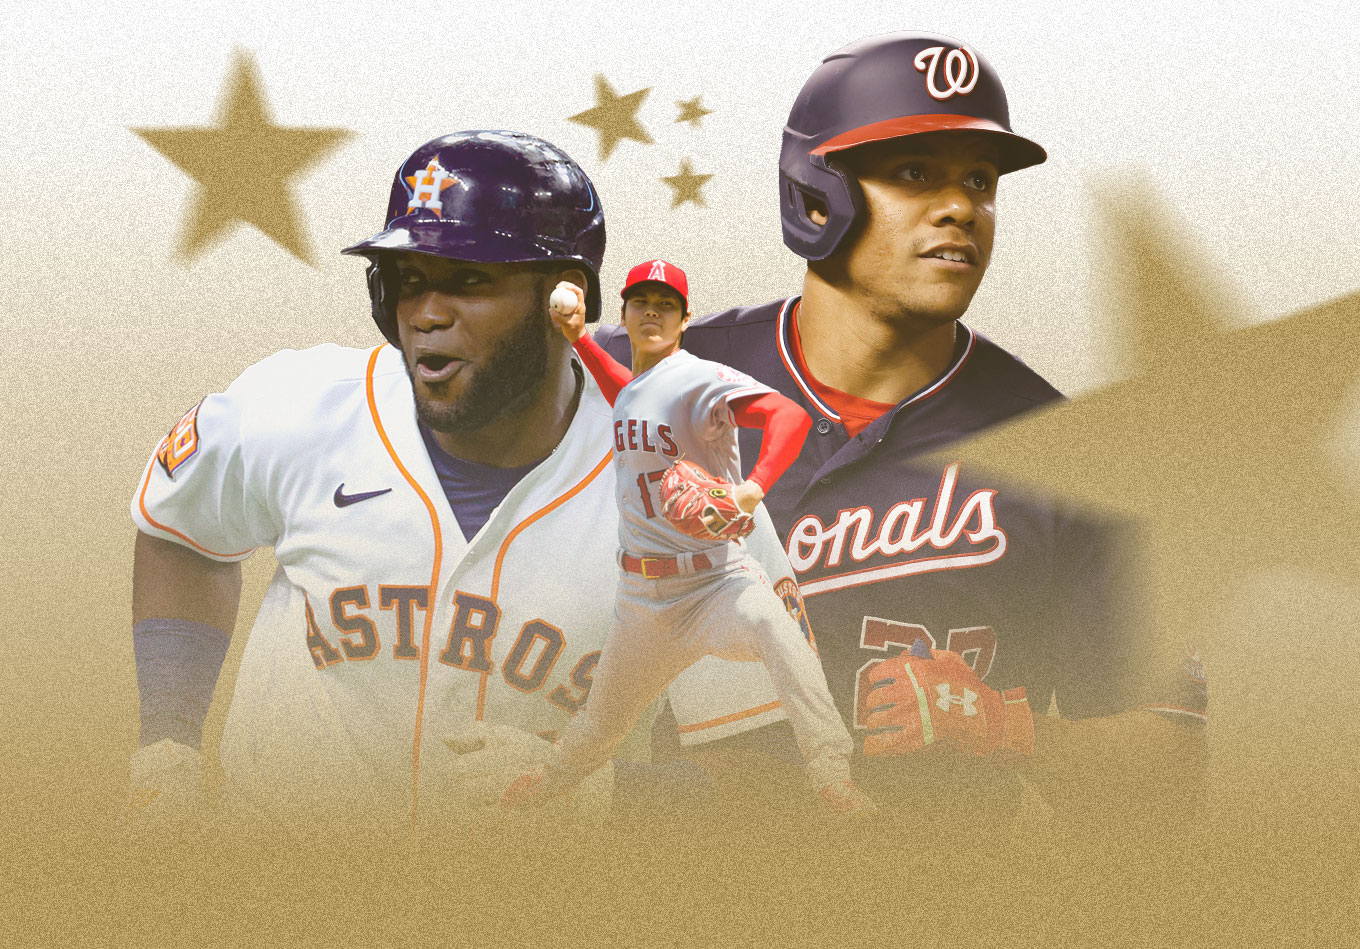 The Analyst’s All-Star Teams: Who Deserves to Start in the Mid-Summer Classic?